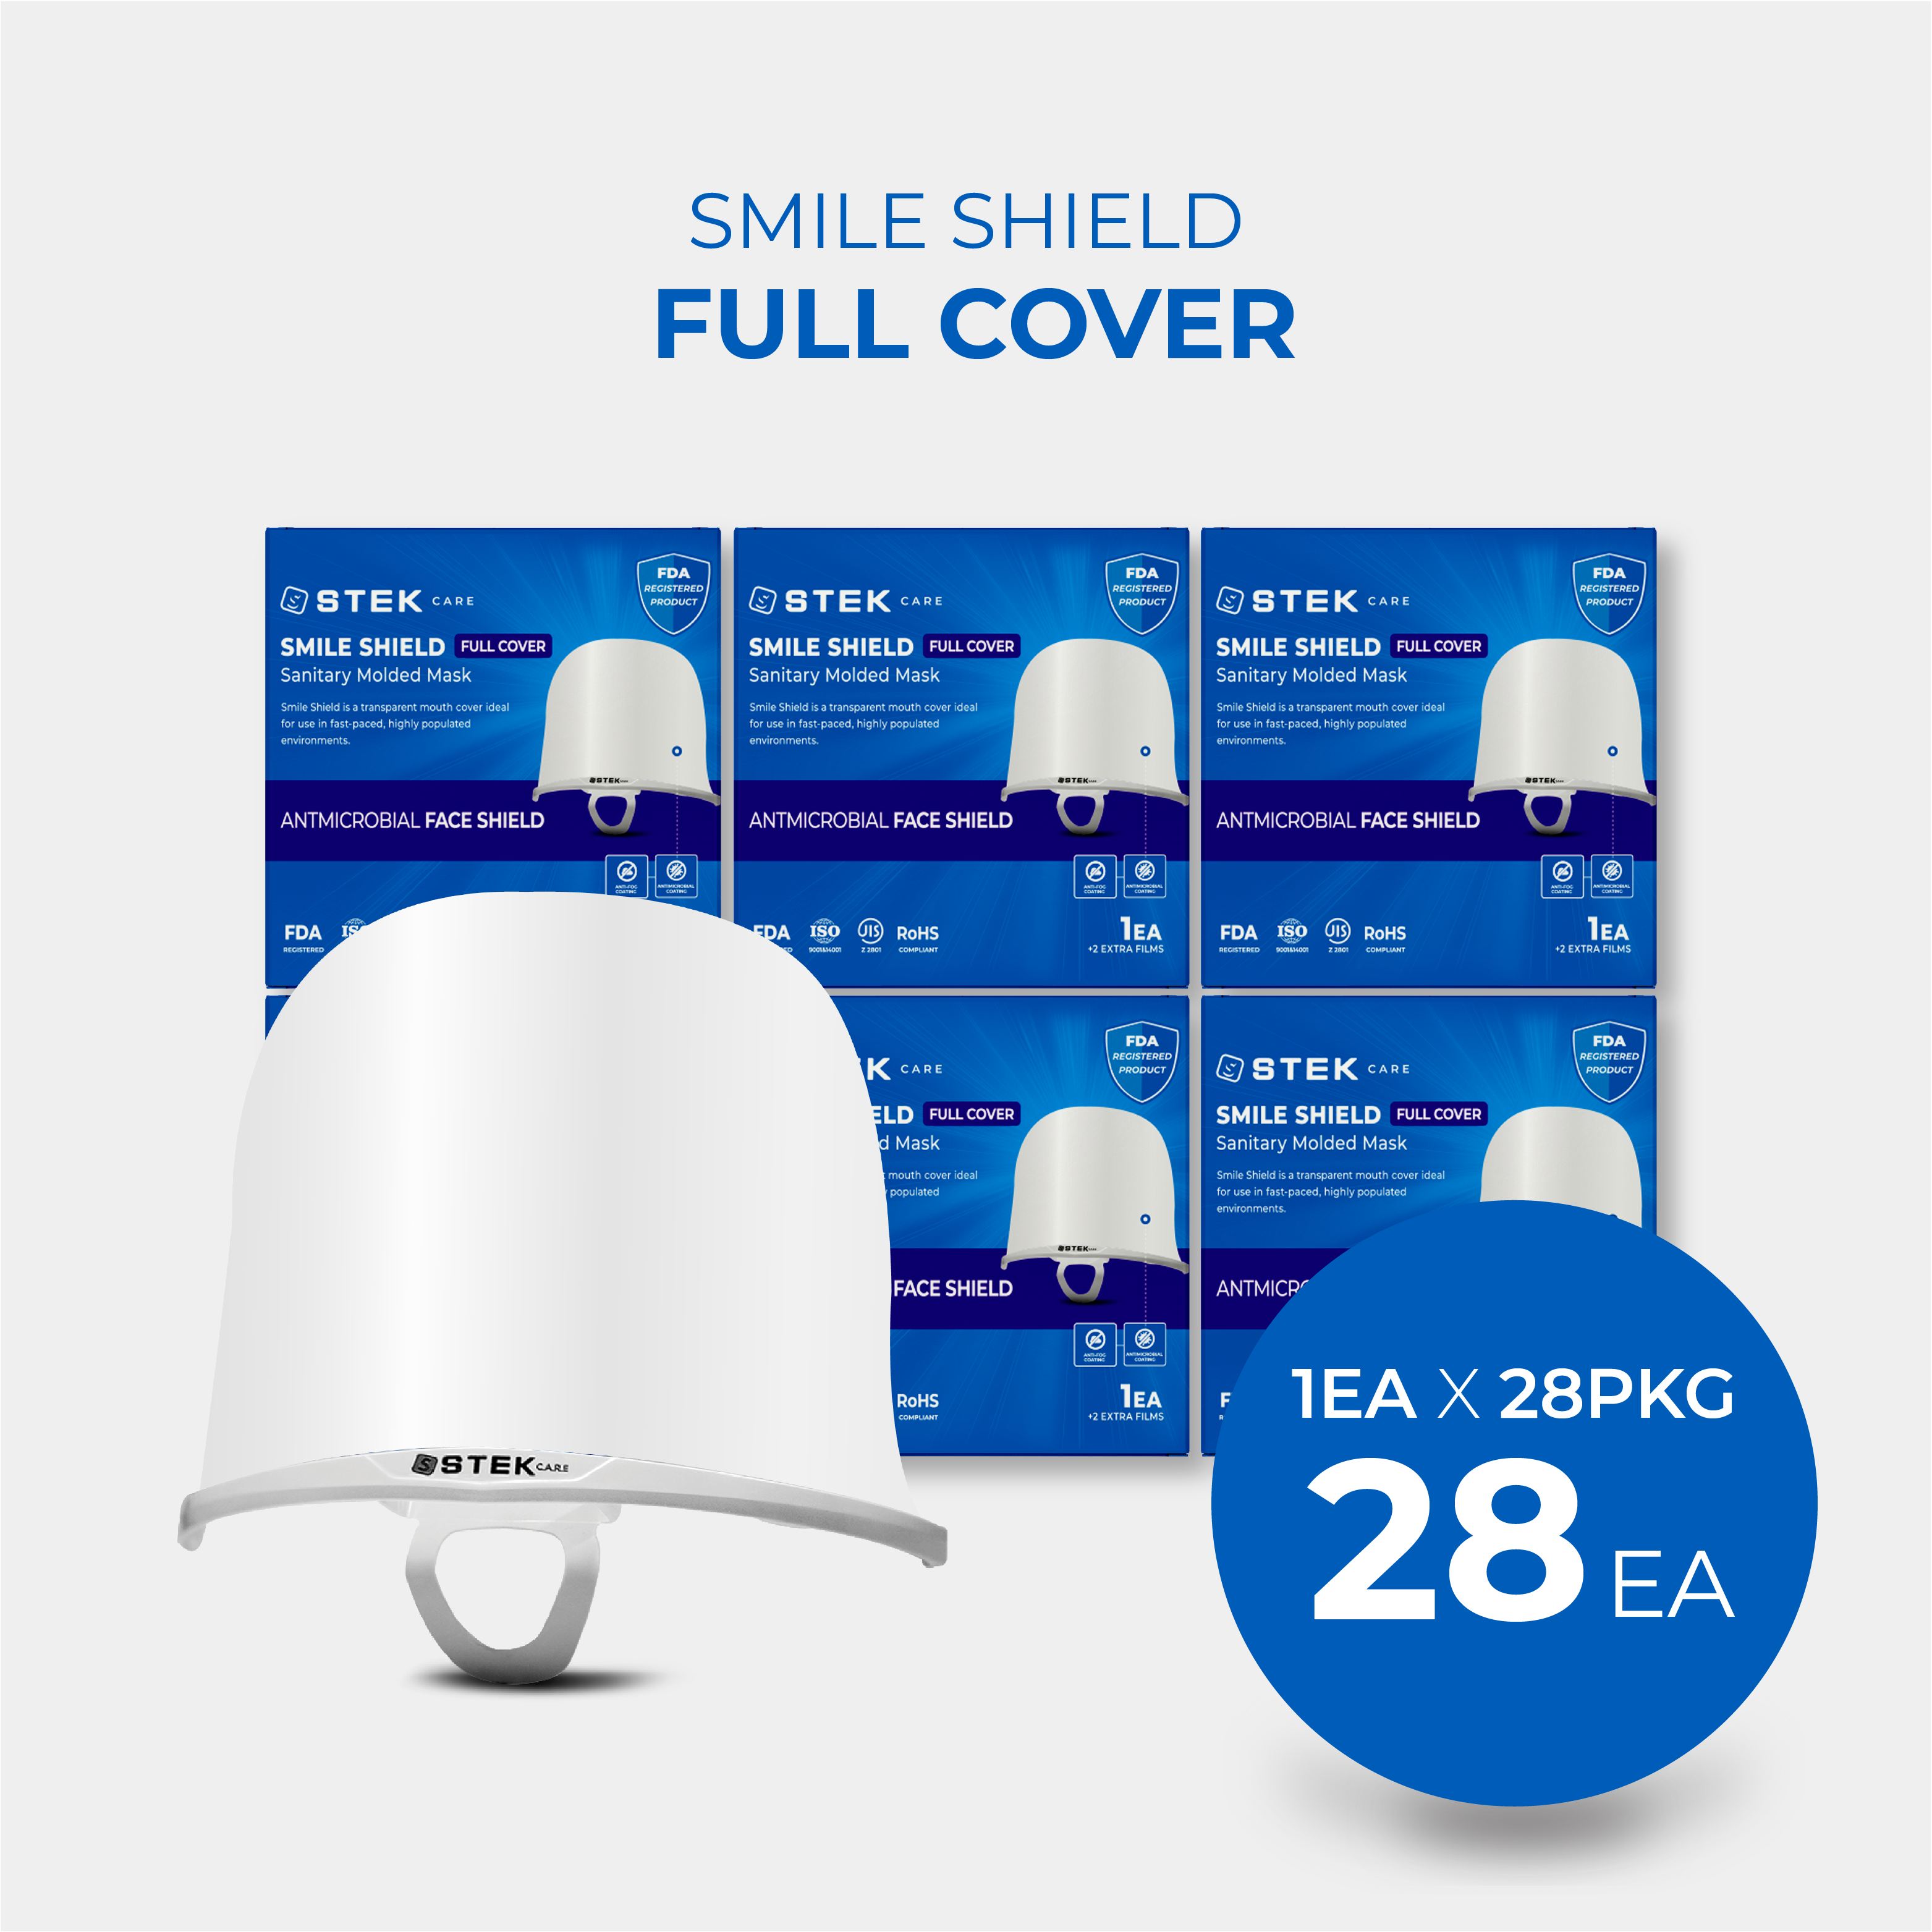 [Free Shipping] Smile Shield Full Cover  28EA - stekcare